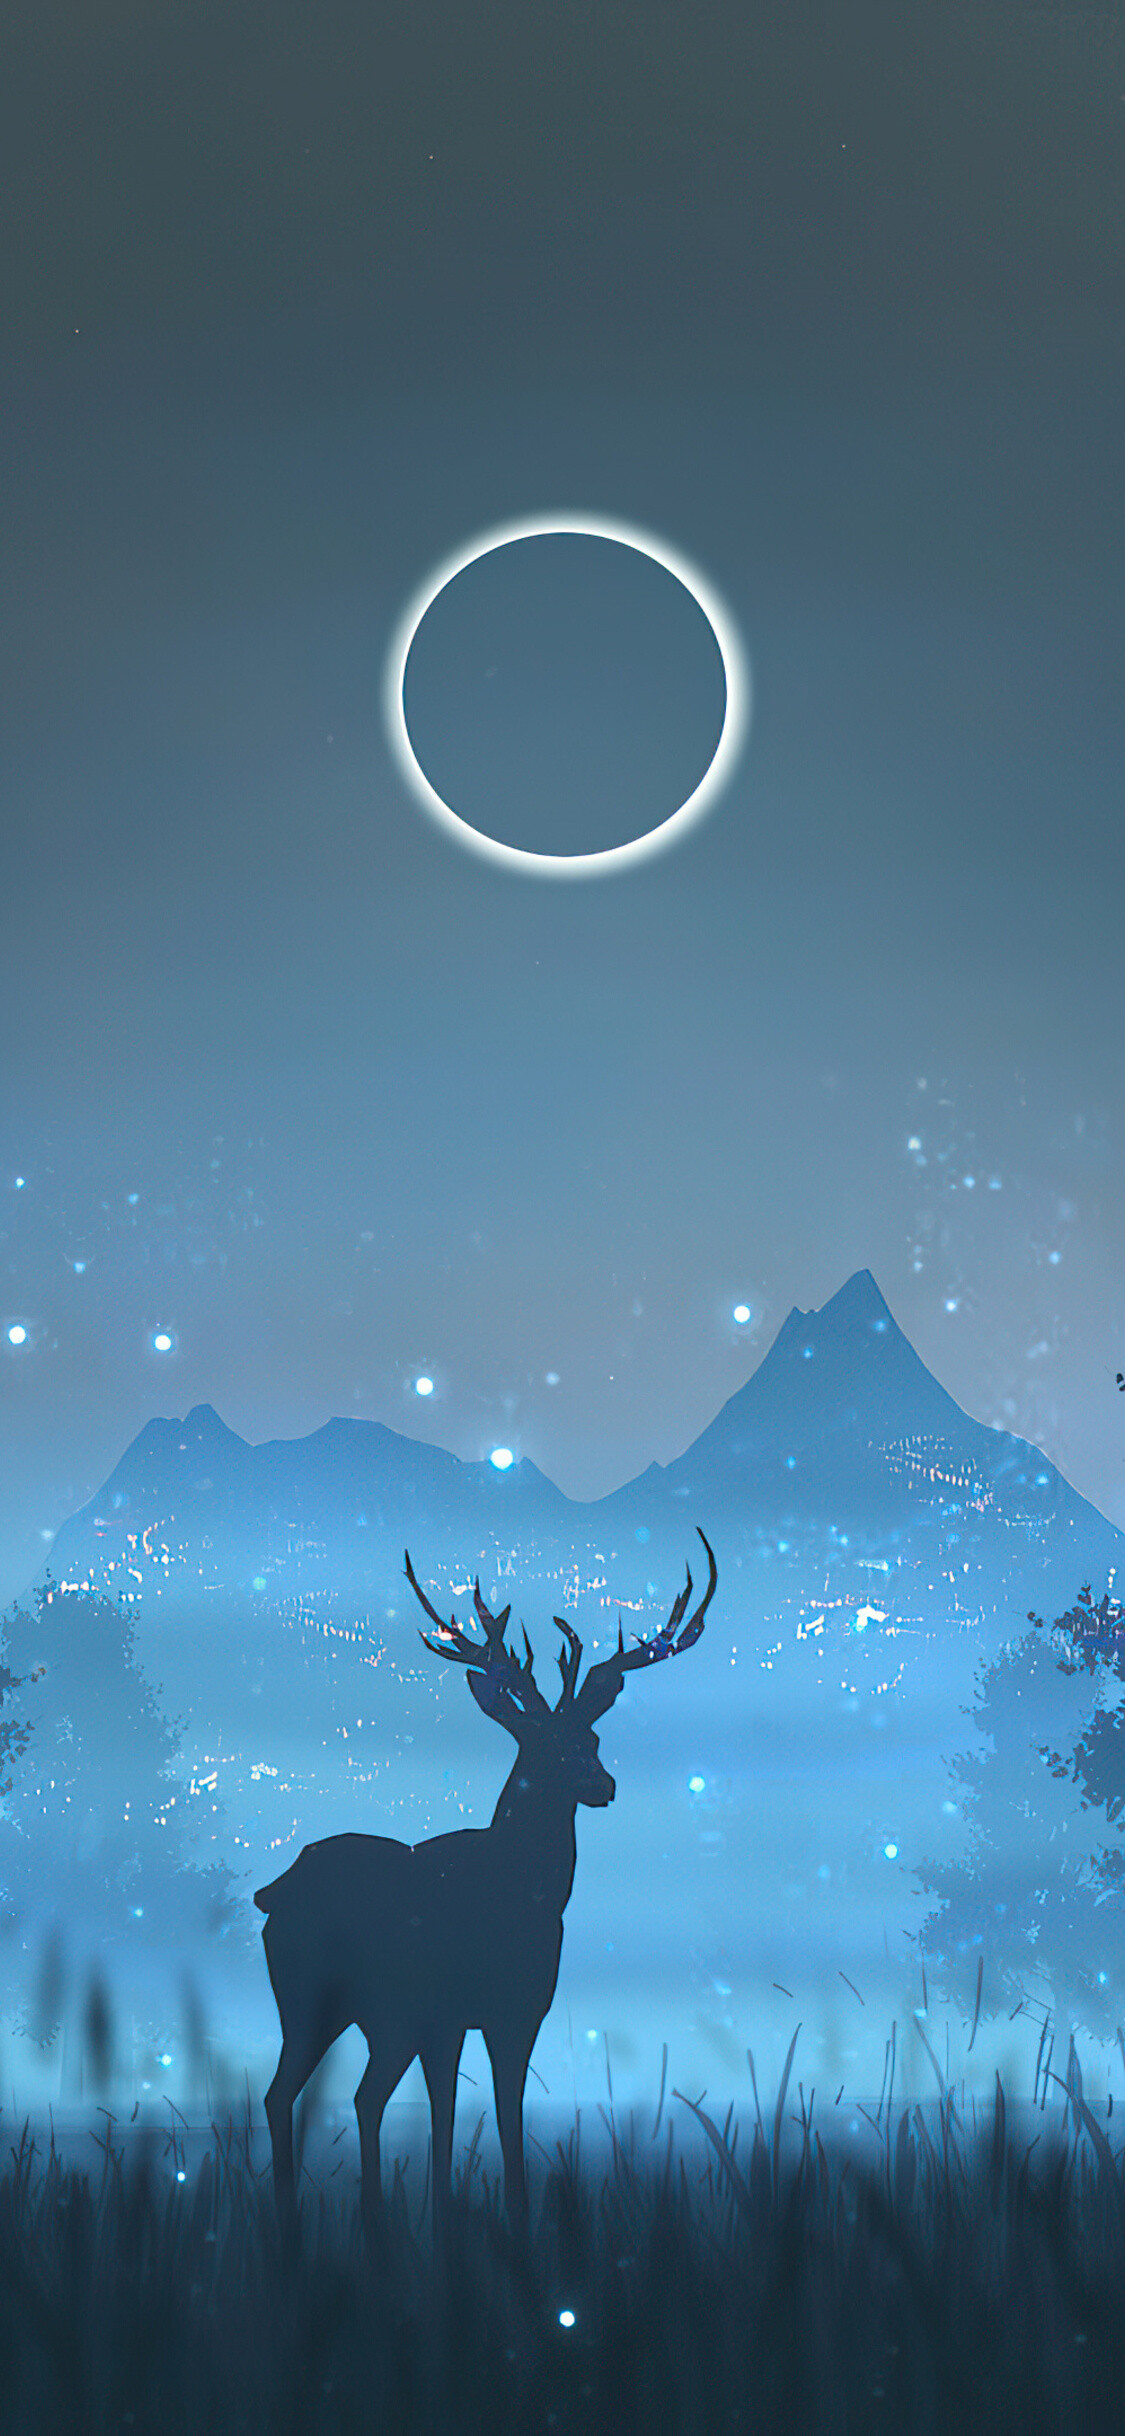 Reindeer: The coat has two layers of fur: a dense woolly undercoat and longer-haired overcoat. 1130x2440 HD Background.